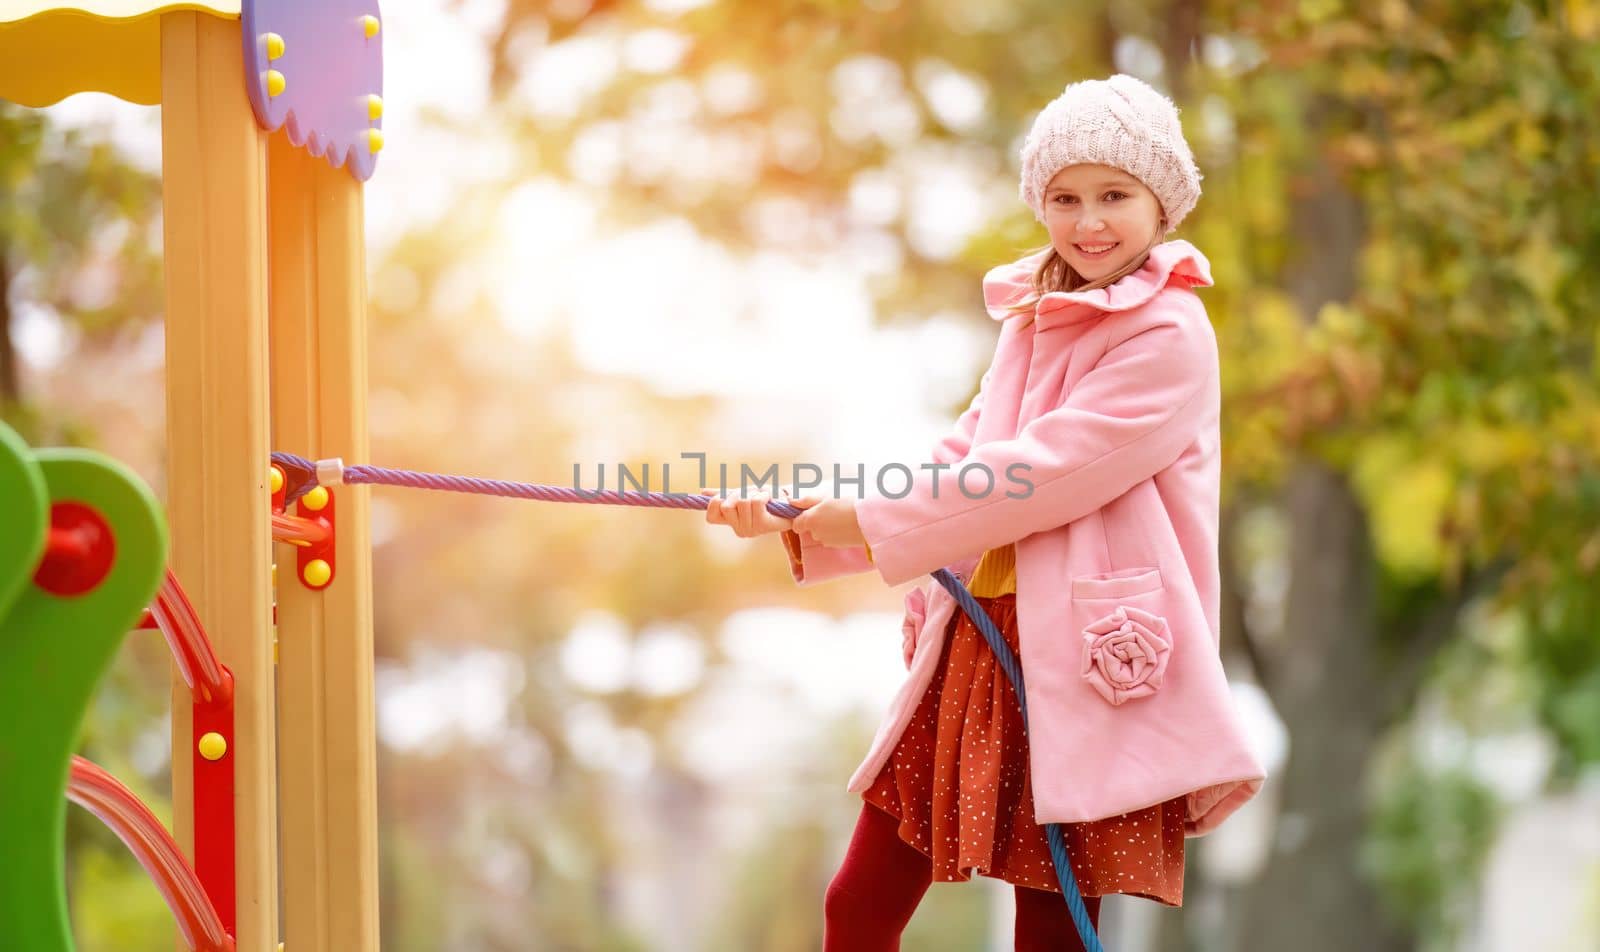 Preteen girl kid climbing on playground at autumn park and smiling. Happy female child portrait outdoors